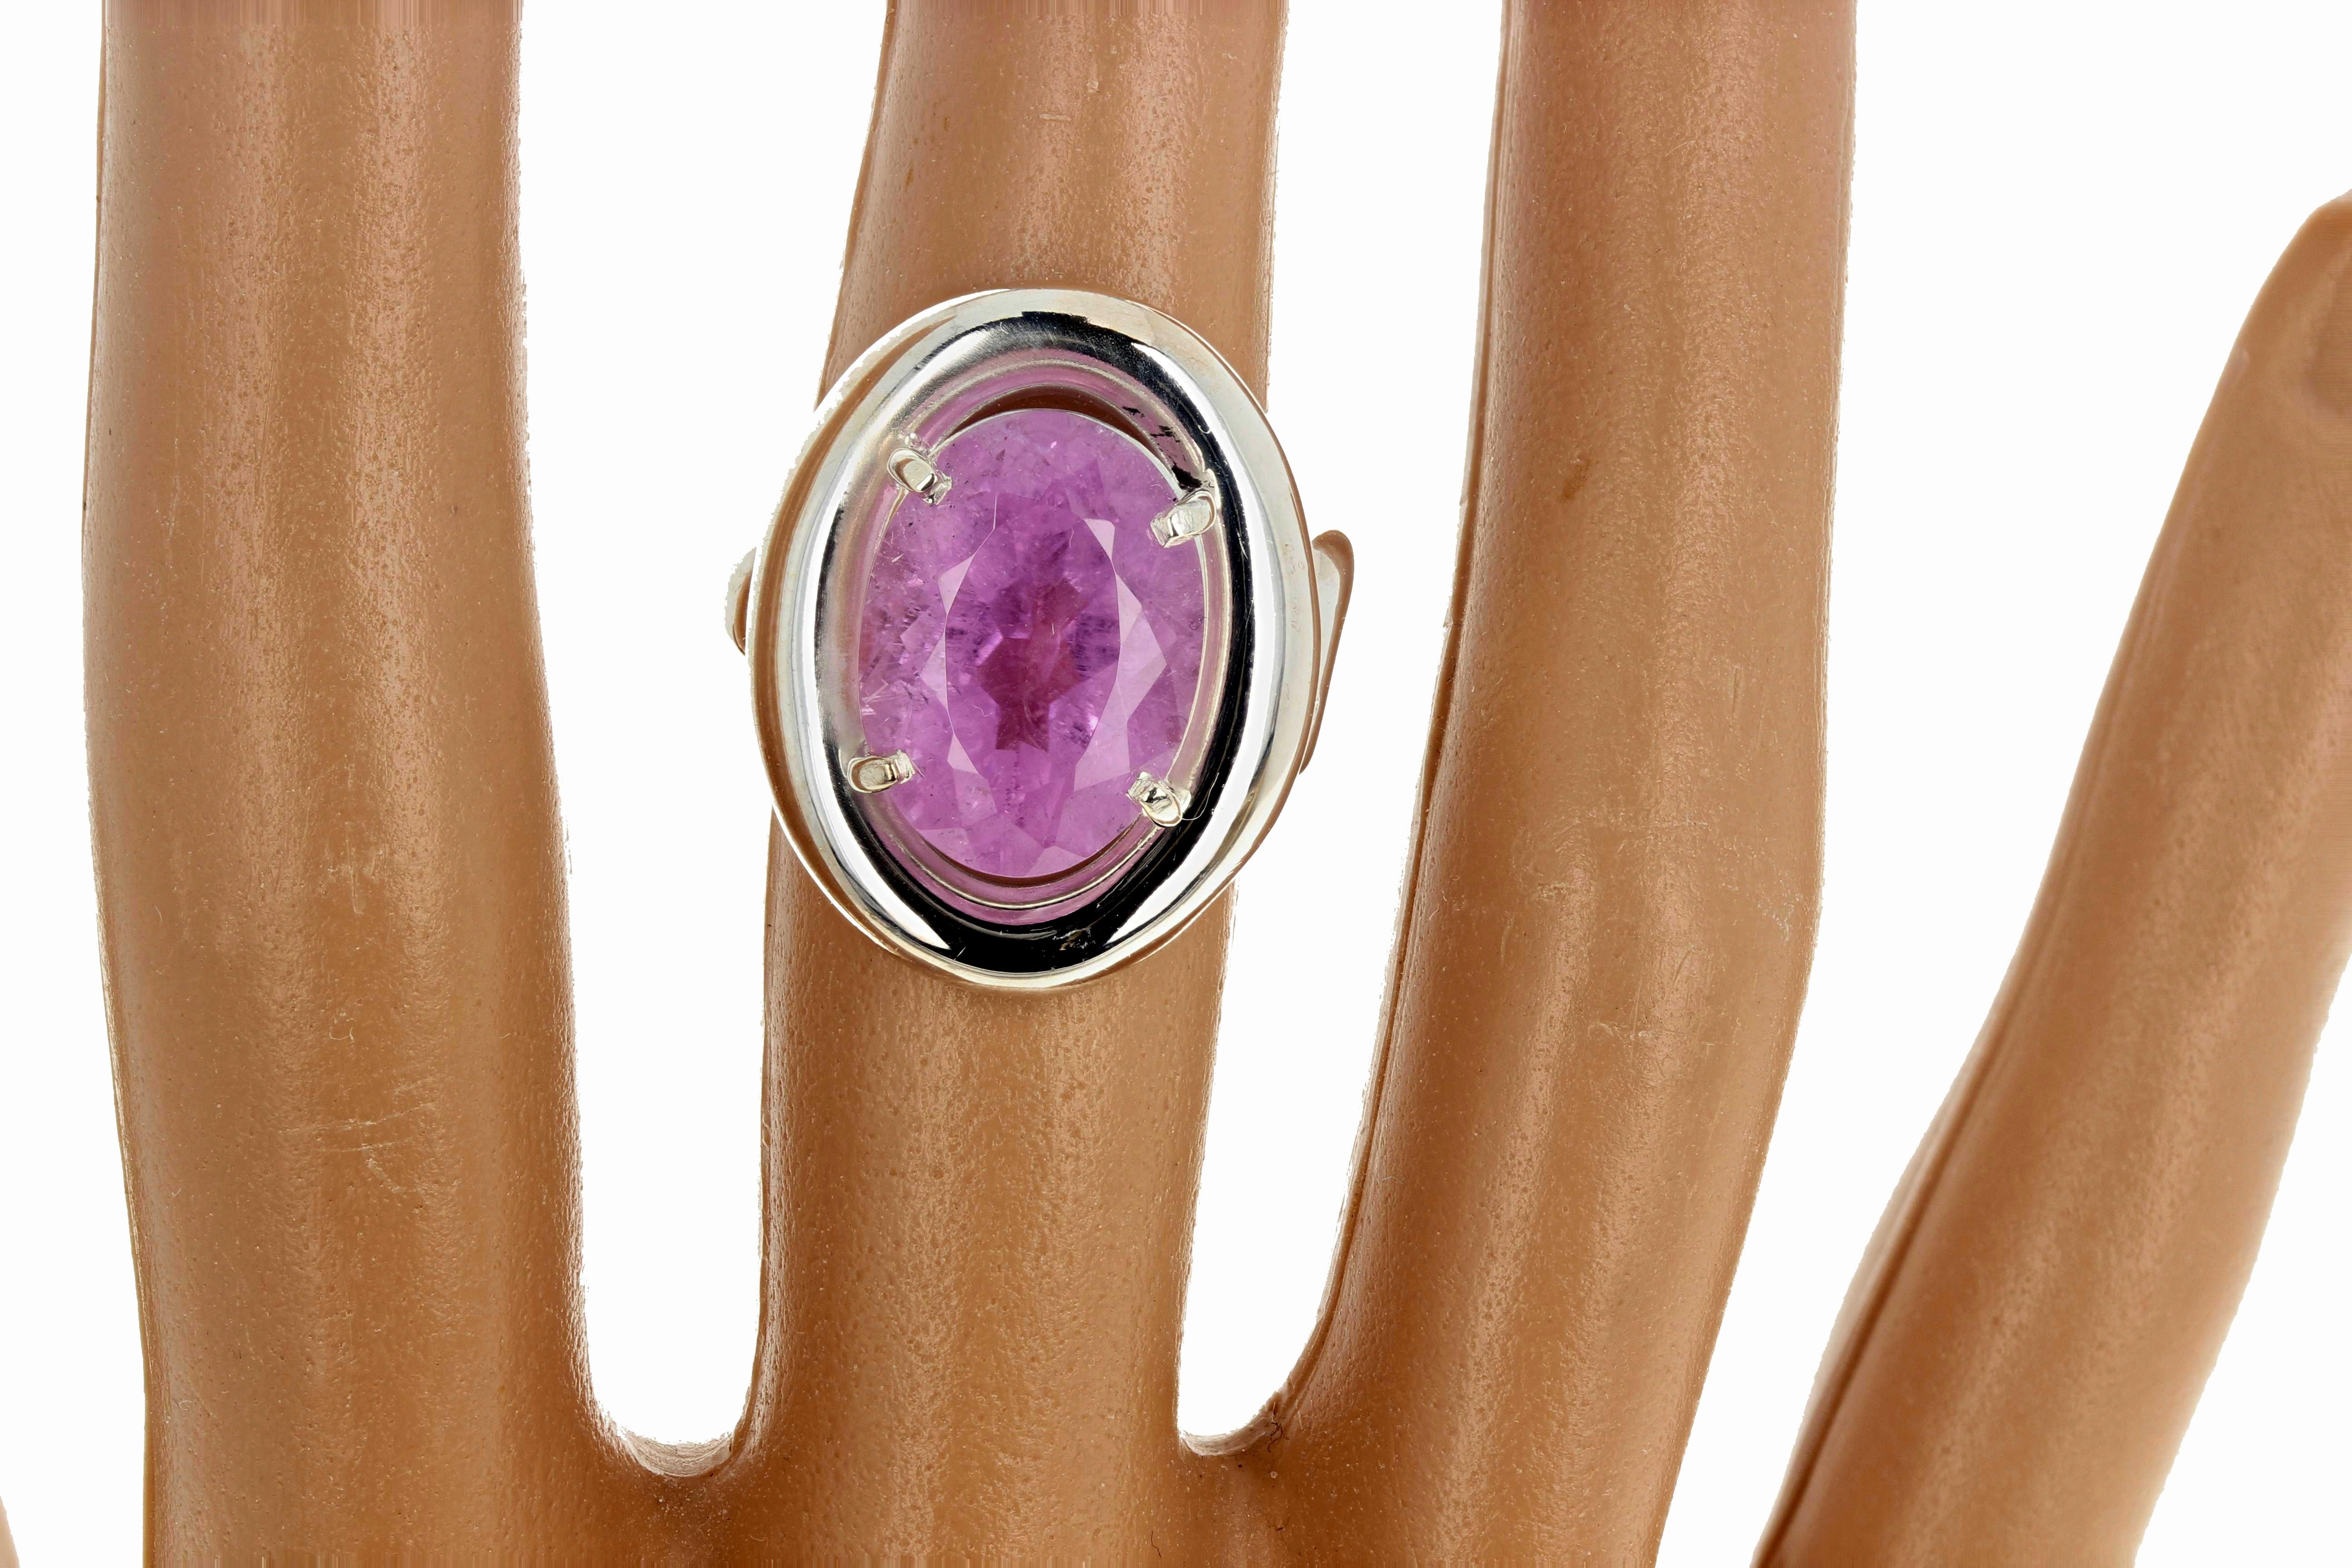 AJD Intensely Pink Natural 9.76 Ct. Kunzite Dramatic Sterling Silver Ring For Sale 2